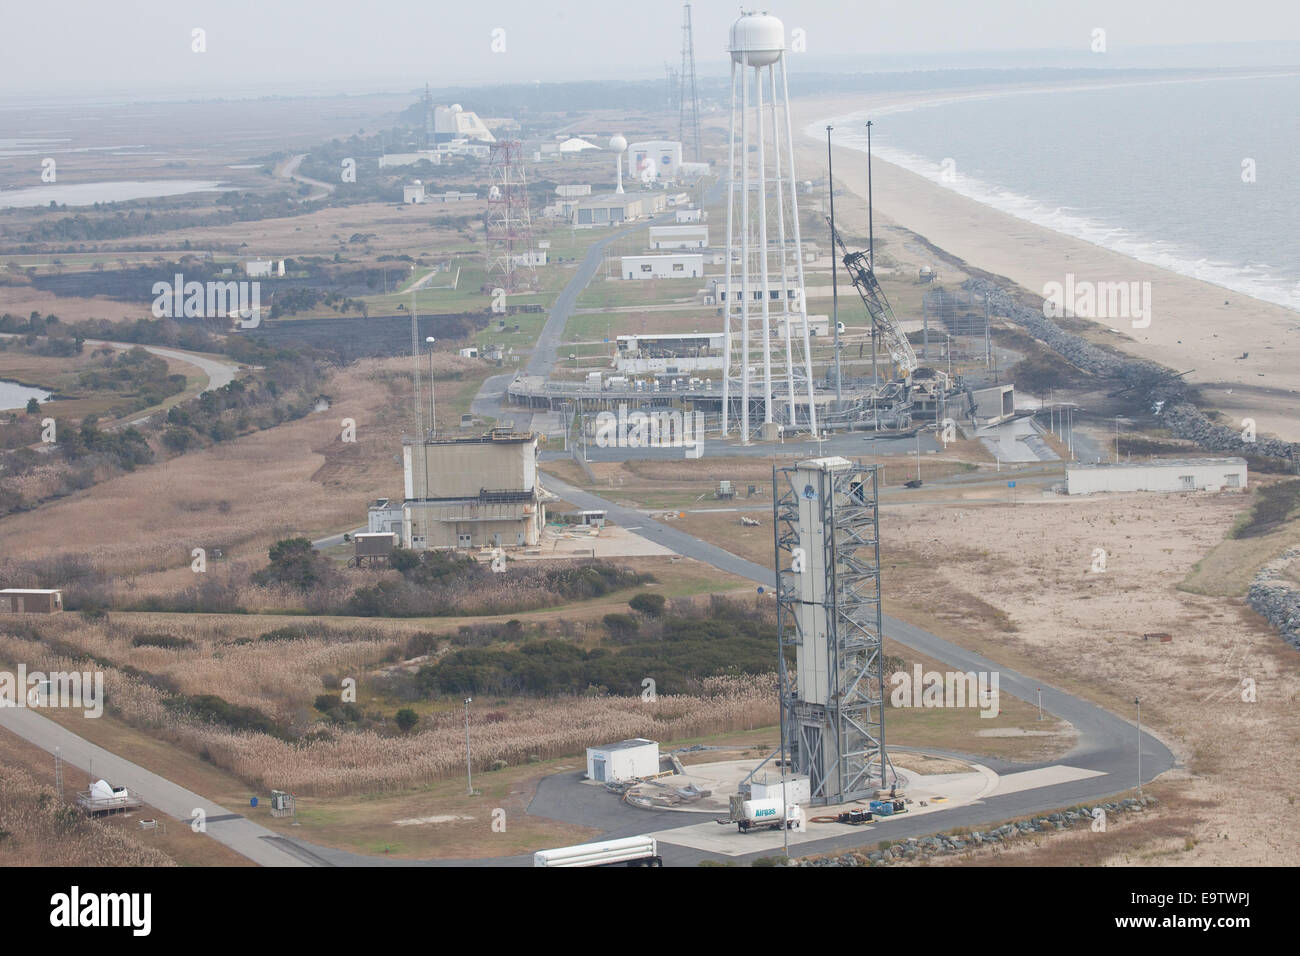 An aerial view of the Wallops Island launch facilities taken by the Wallops Incident Response Team Wednesday, Oct. 29, 2014 following the failed launch attempt of Orbital Science Corp.'s Antares rocket Oct. 28, Wallops Island, VA. Stock Photo